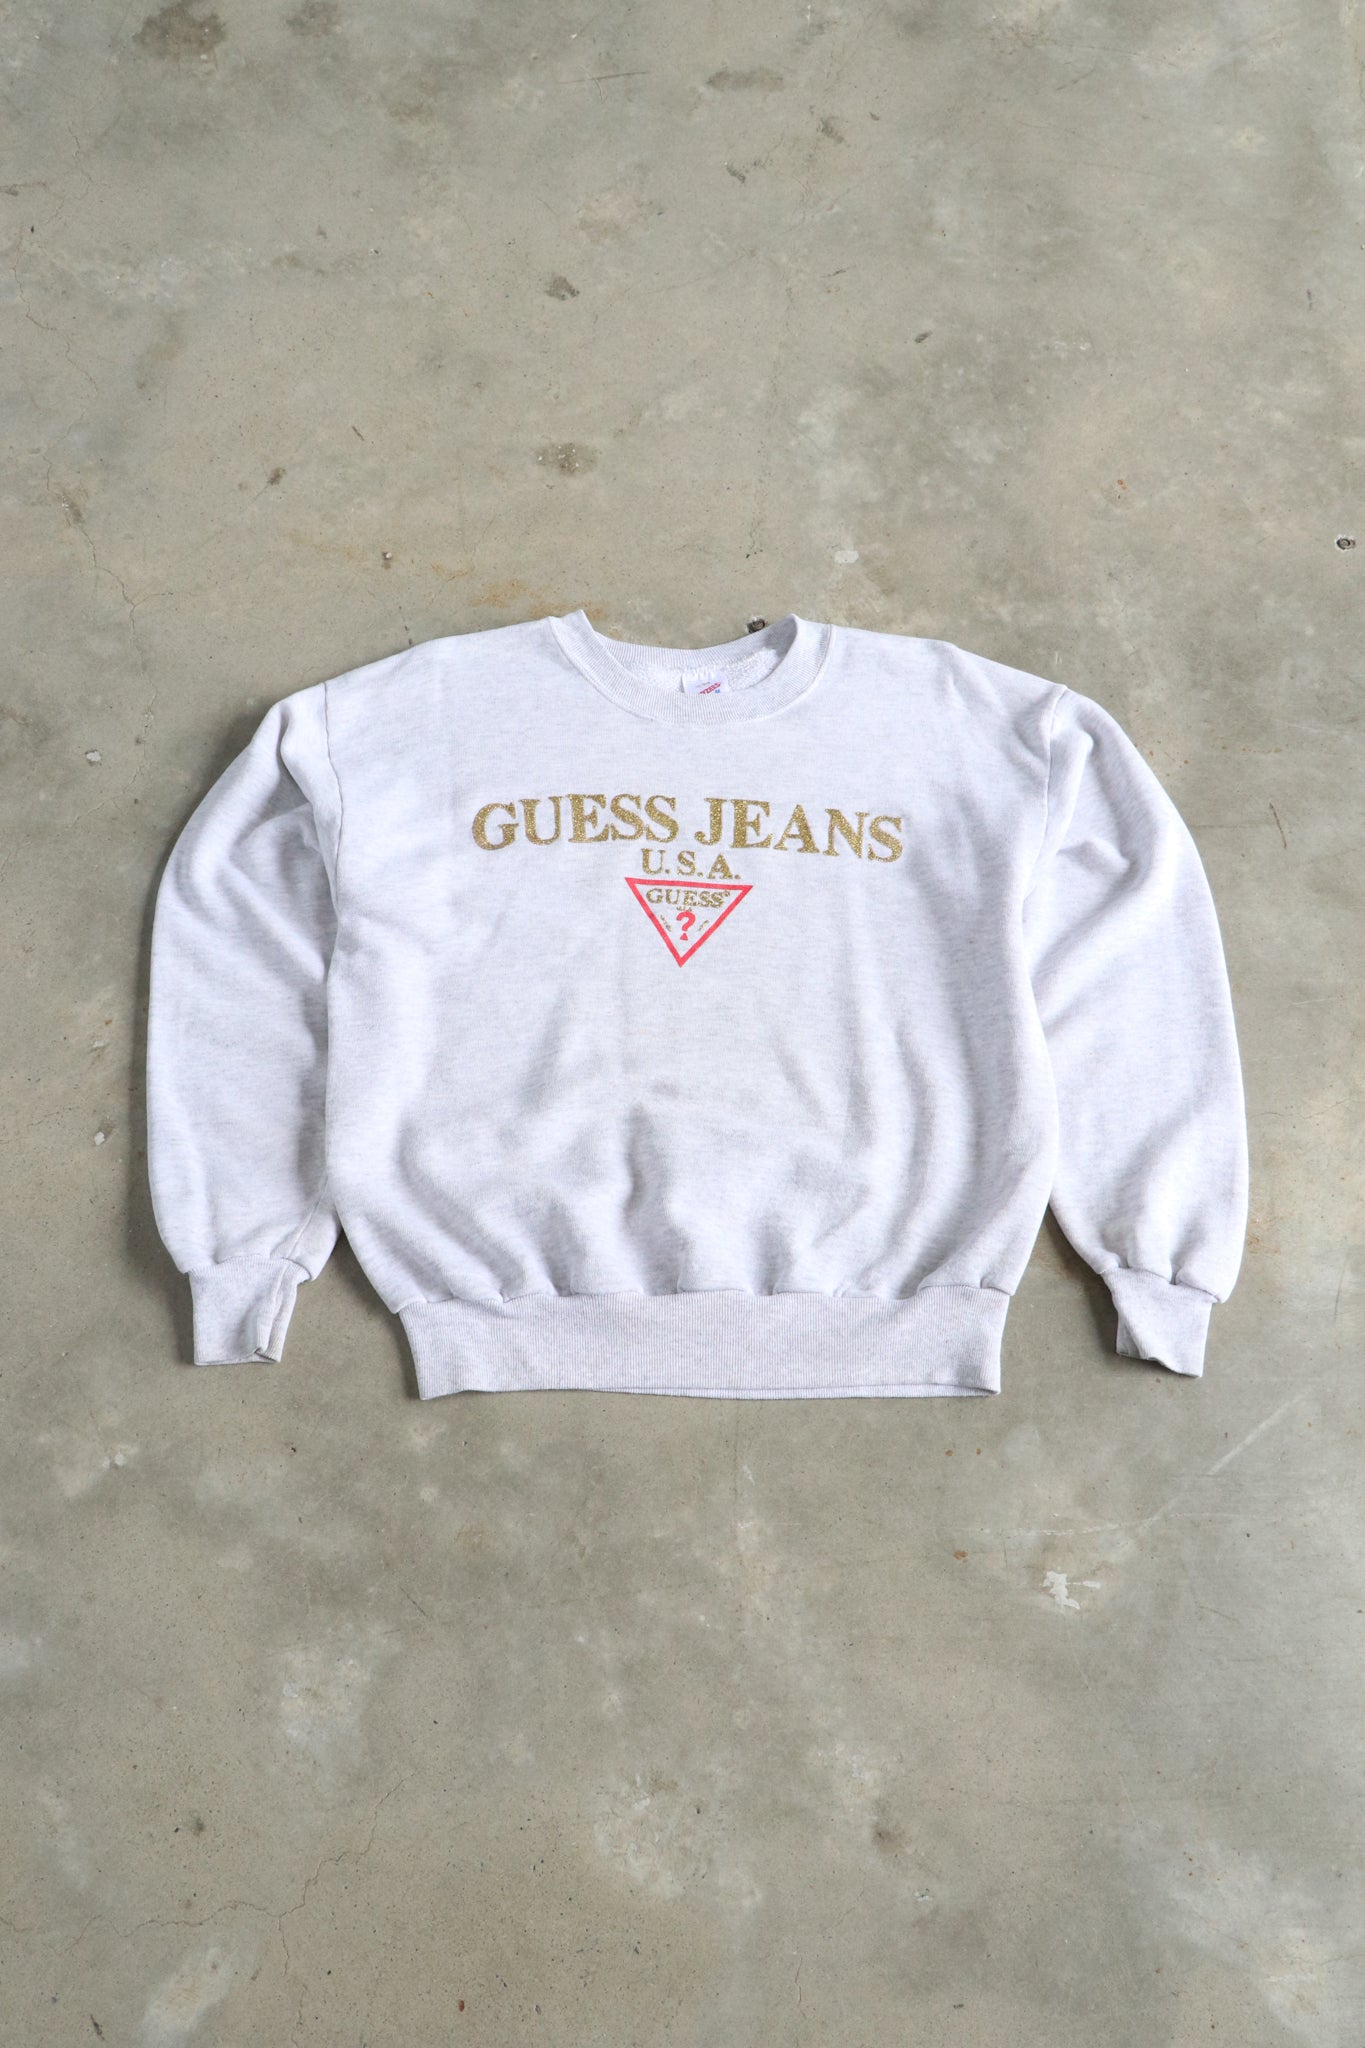 Vintage Guess Jeans Sweater Medium